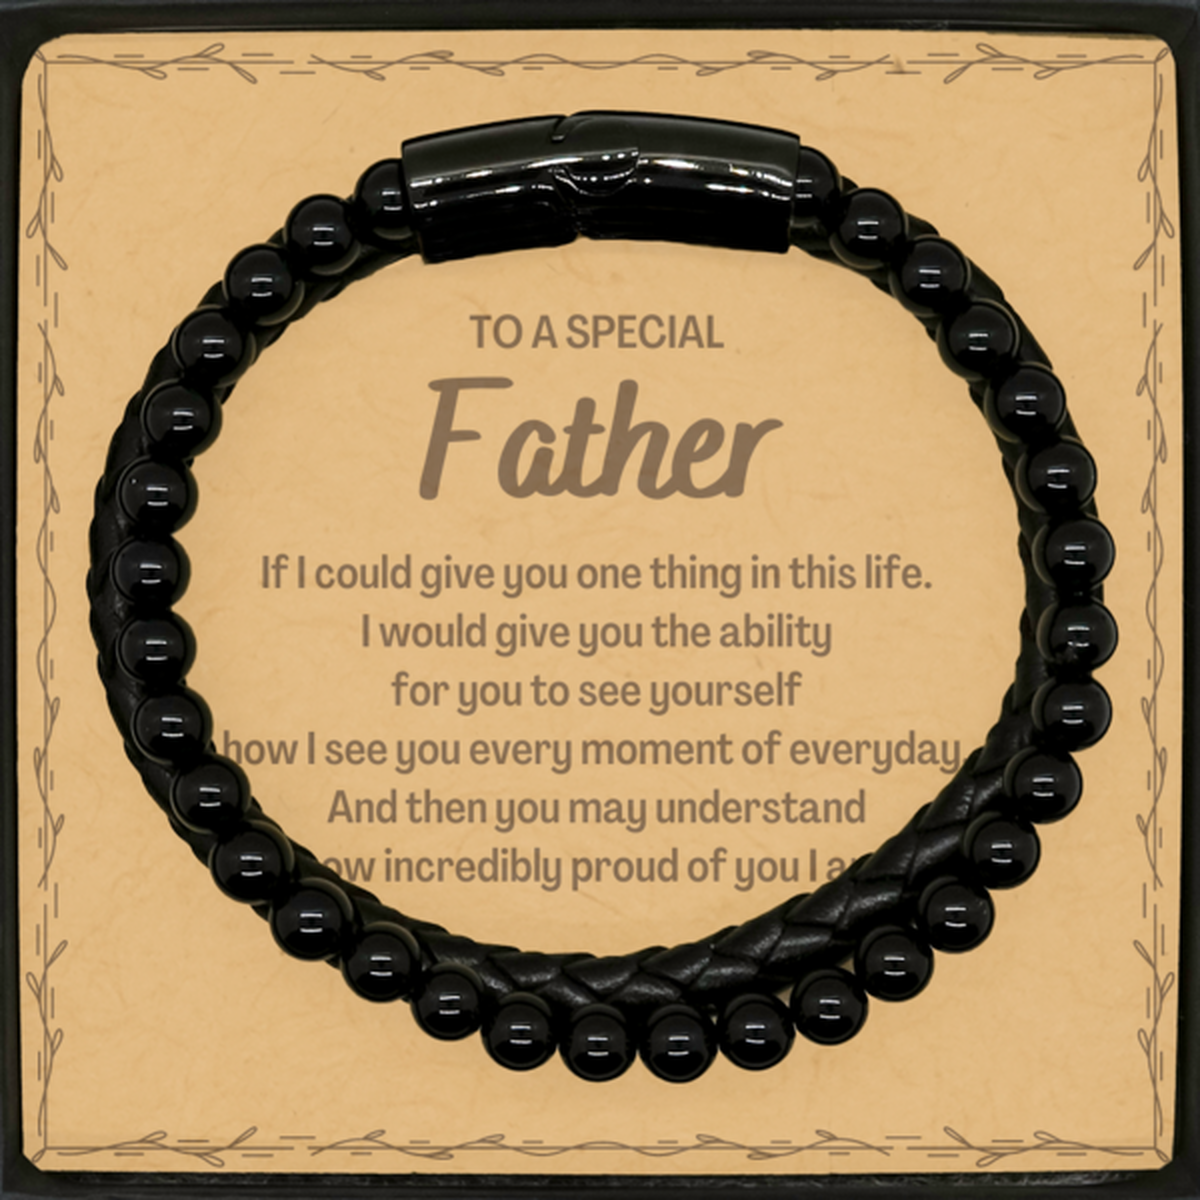 To My Father Stone Leather Bracelets, Gifts For Father Message Card, Inspirational Gifts for Christmas Birthday, Epic Gifts for Father To A Special Father how incredibly proud of you I am